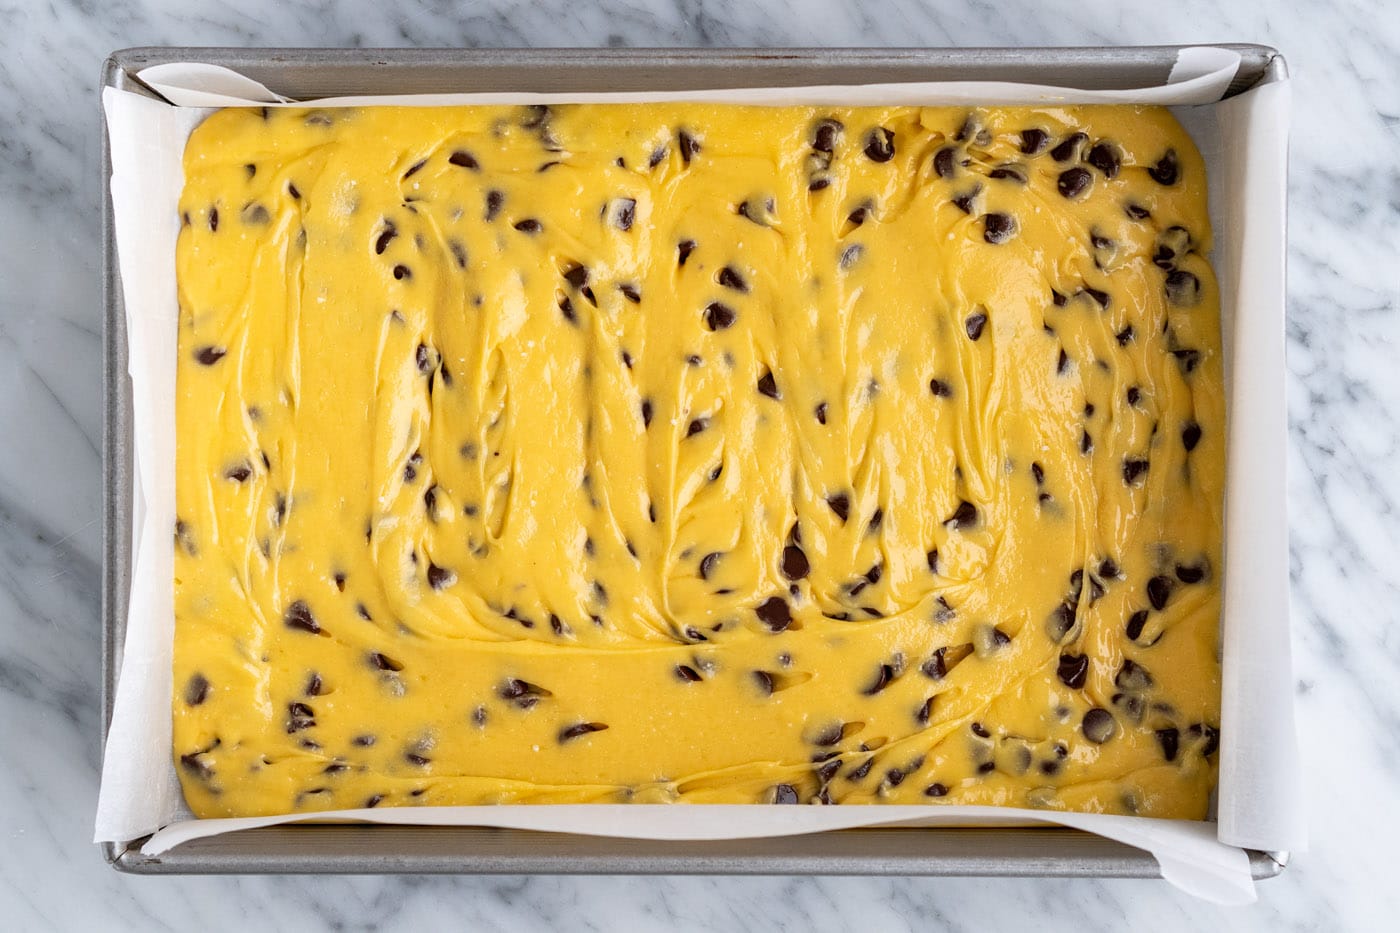 cake mix cookie bar batter spread out in a baking pan